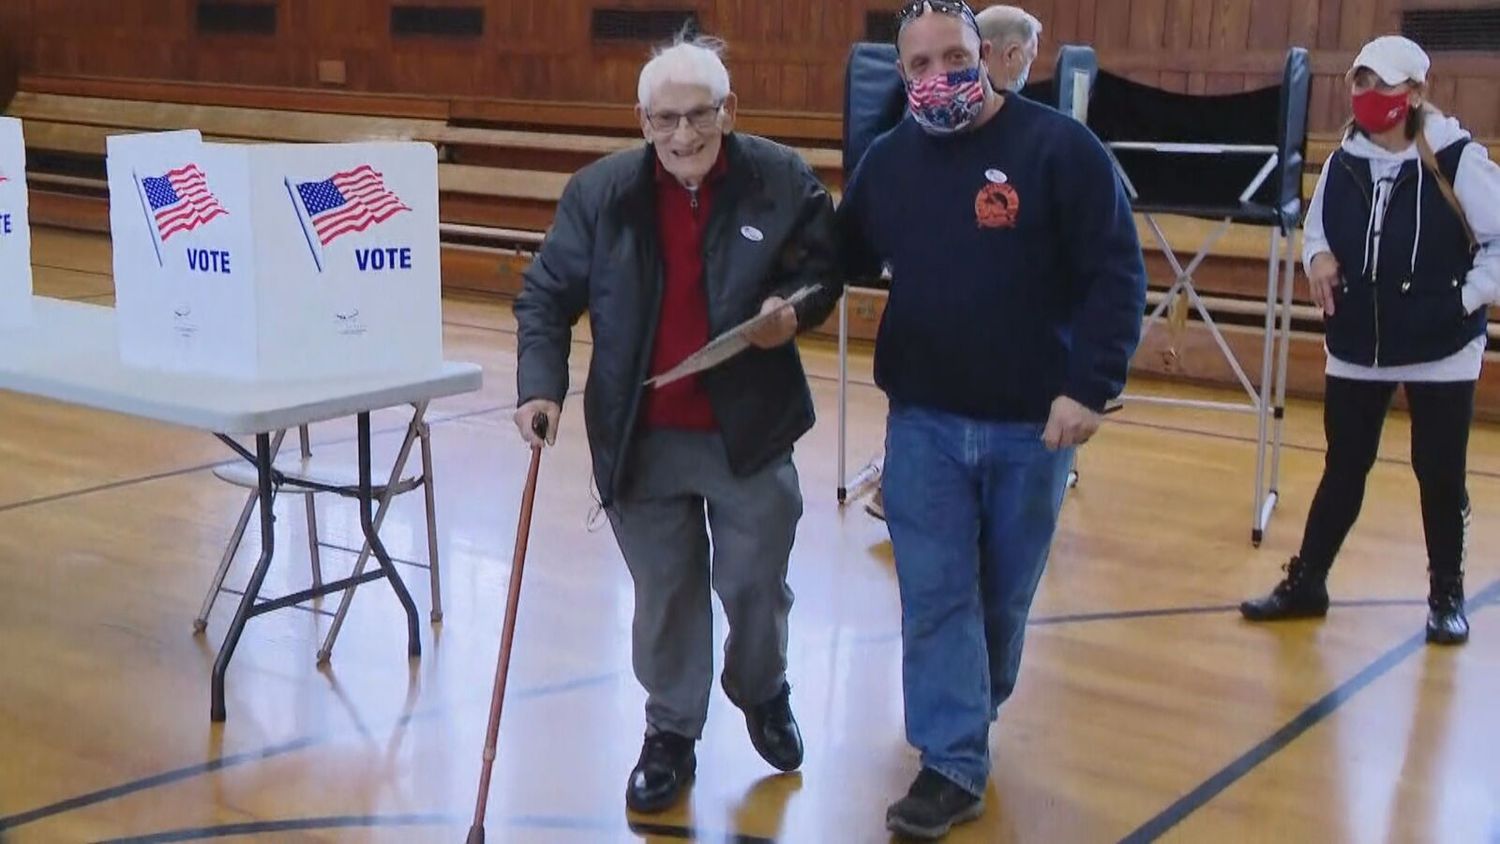 Samuel Bovalino, 104, of Syracuse, voting in the 2020 Election